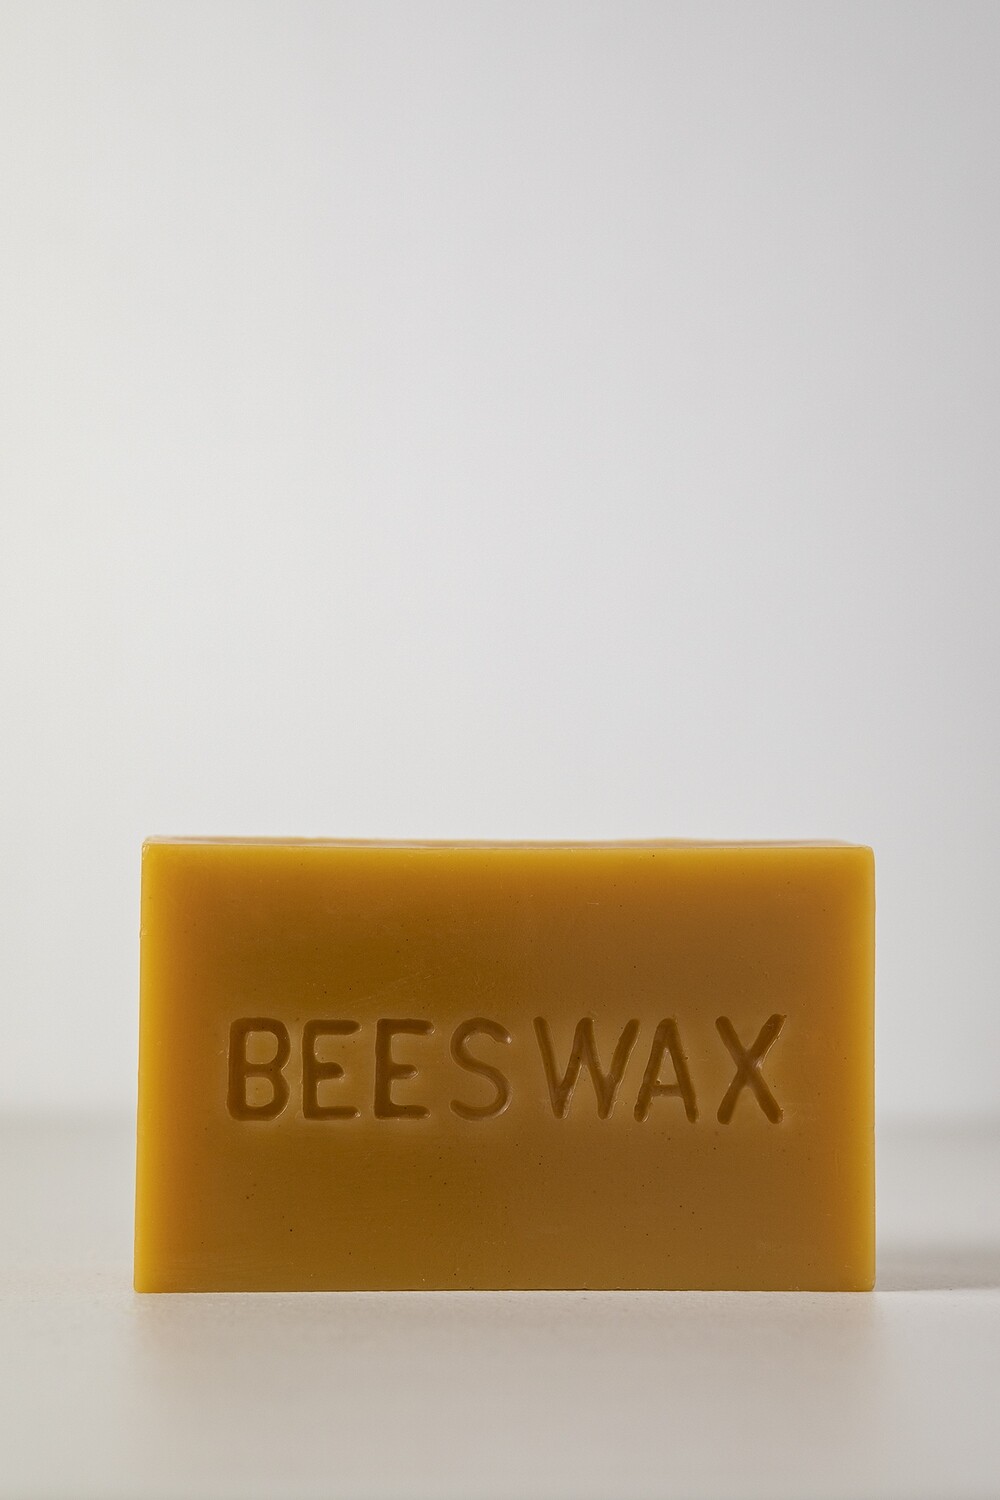 Beeswax Block - with Inscription